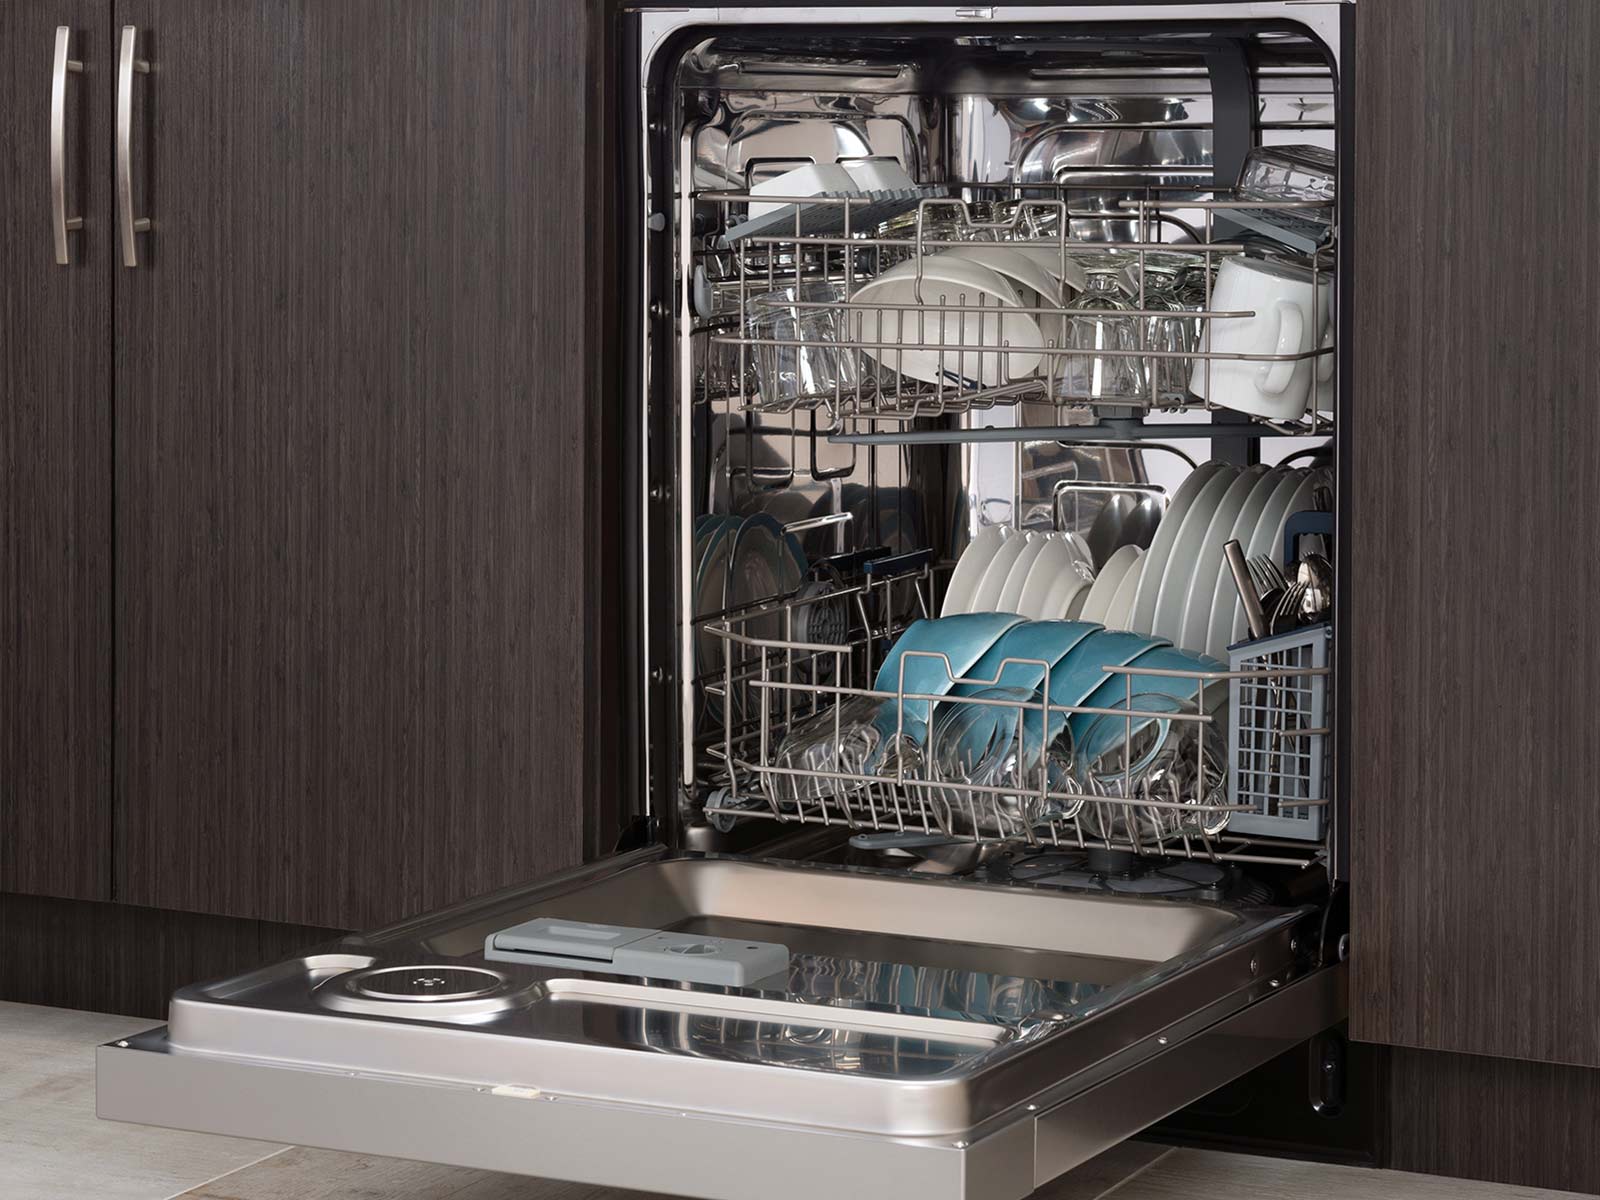 Samsung DW80N3030US/AA - 24 Built-In Dishwasher in Stainless Steel